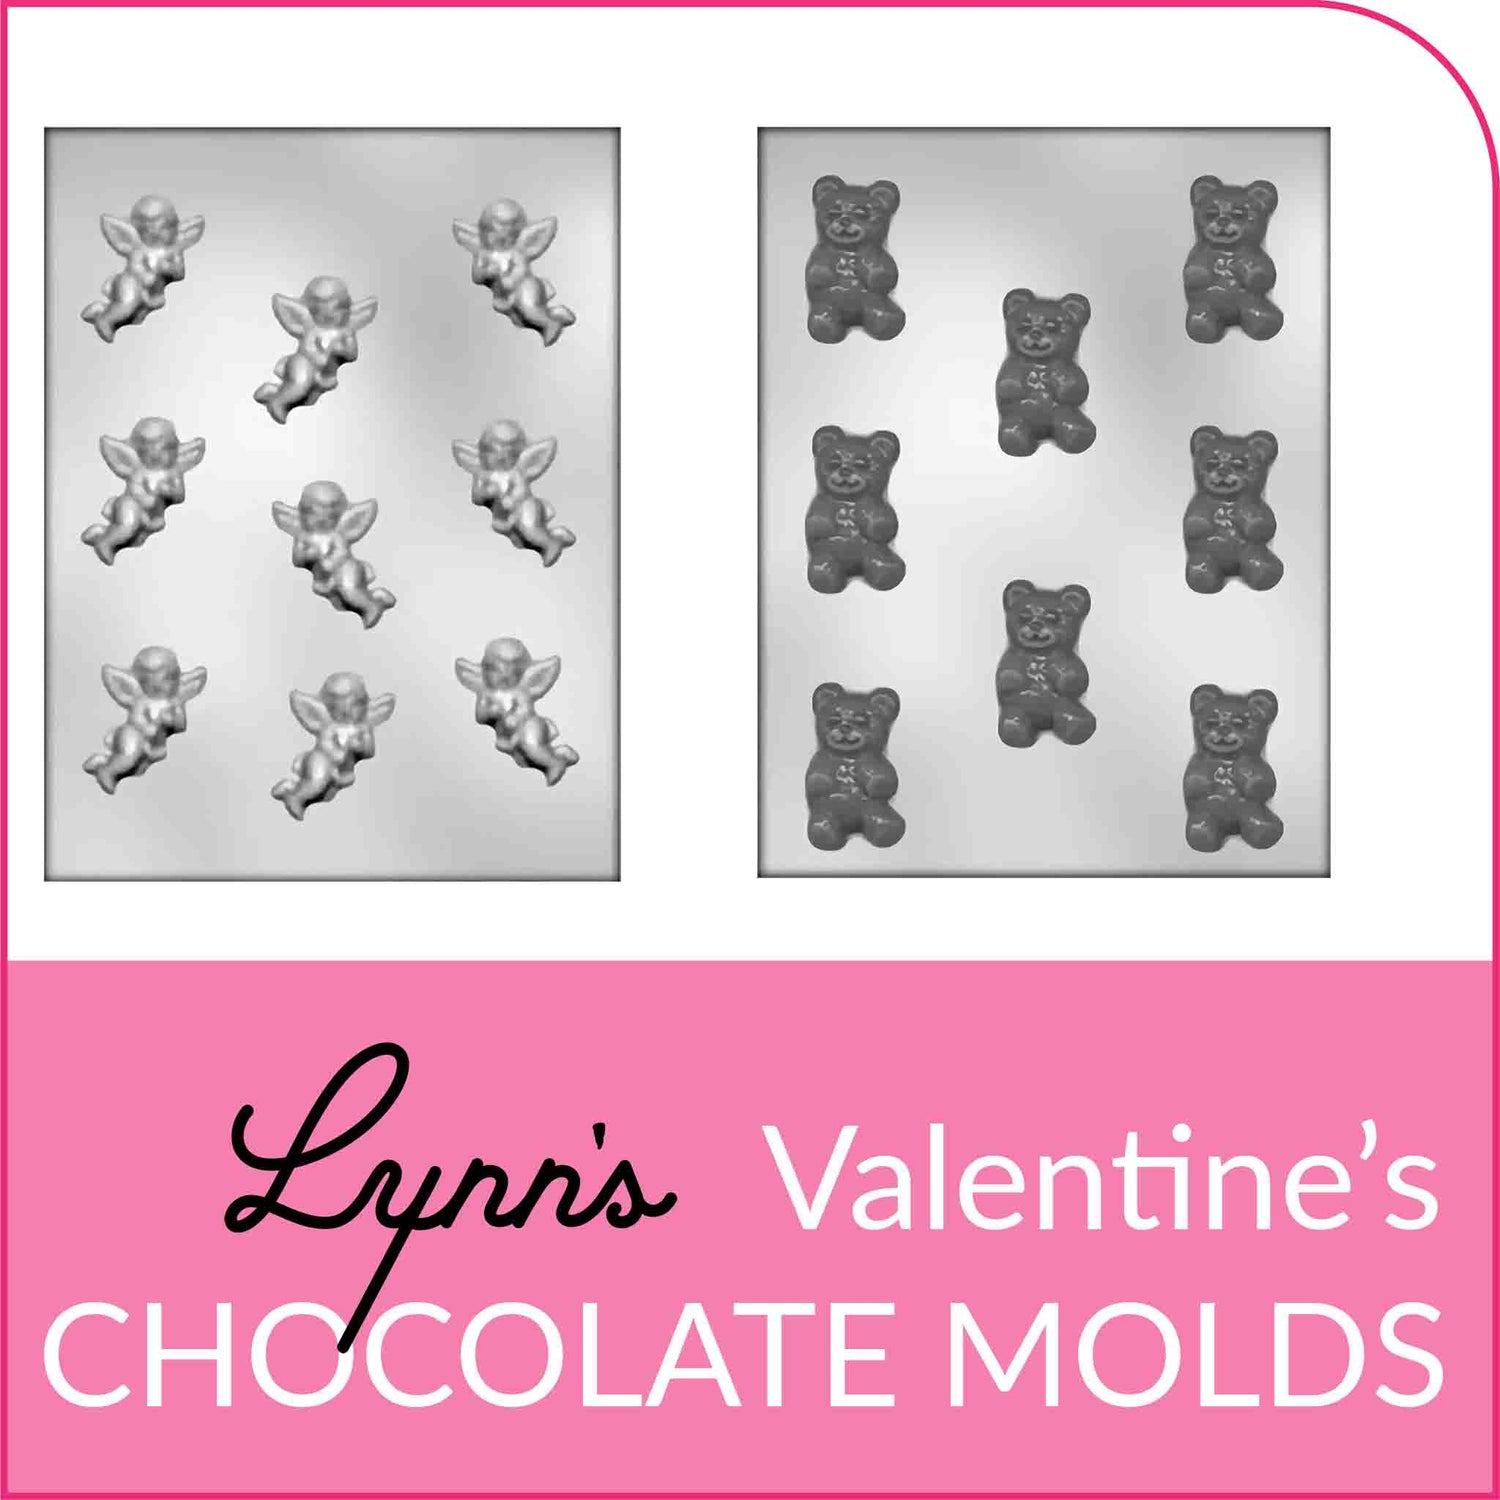 Shop Valentine's Day Chocolate Molds at Lynn's